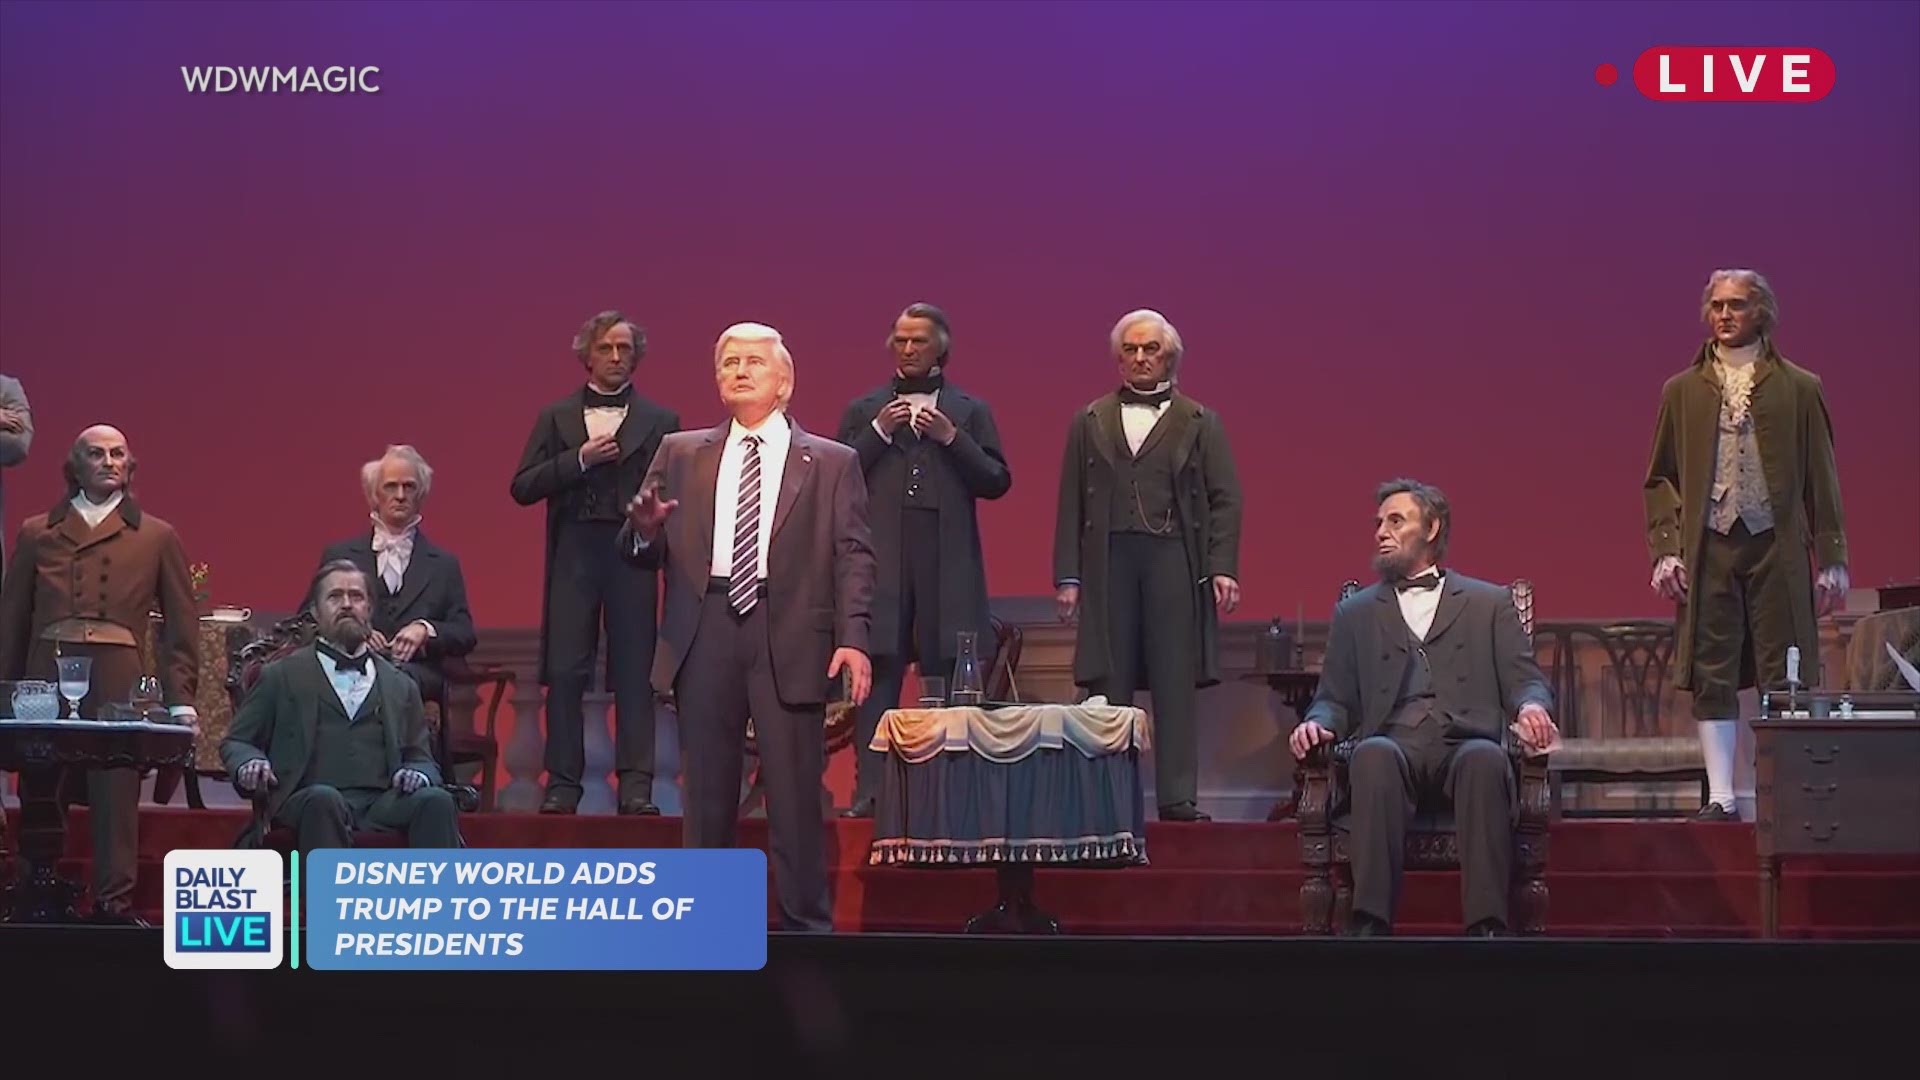 Donald Trump is now a fixture in the Hall of Presidents exhibit at the Magic Kingdom in Orlando.